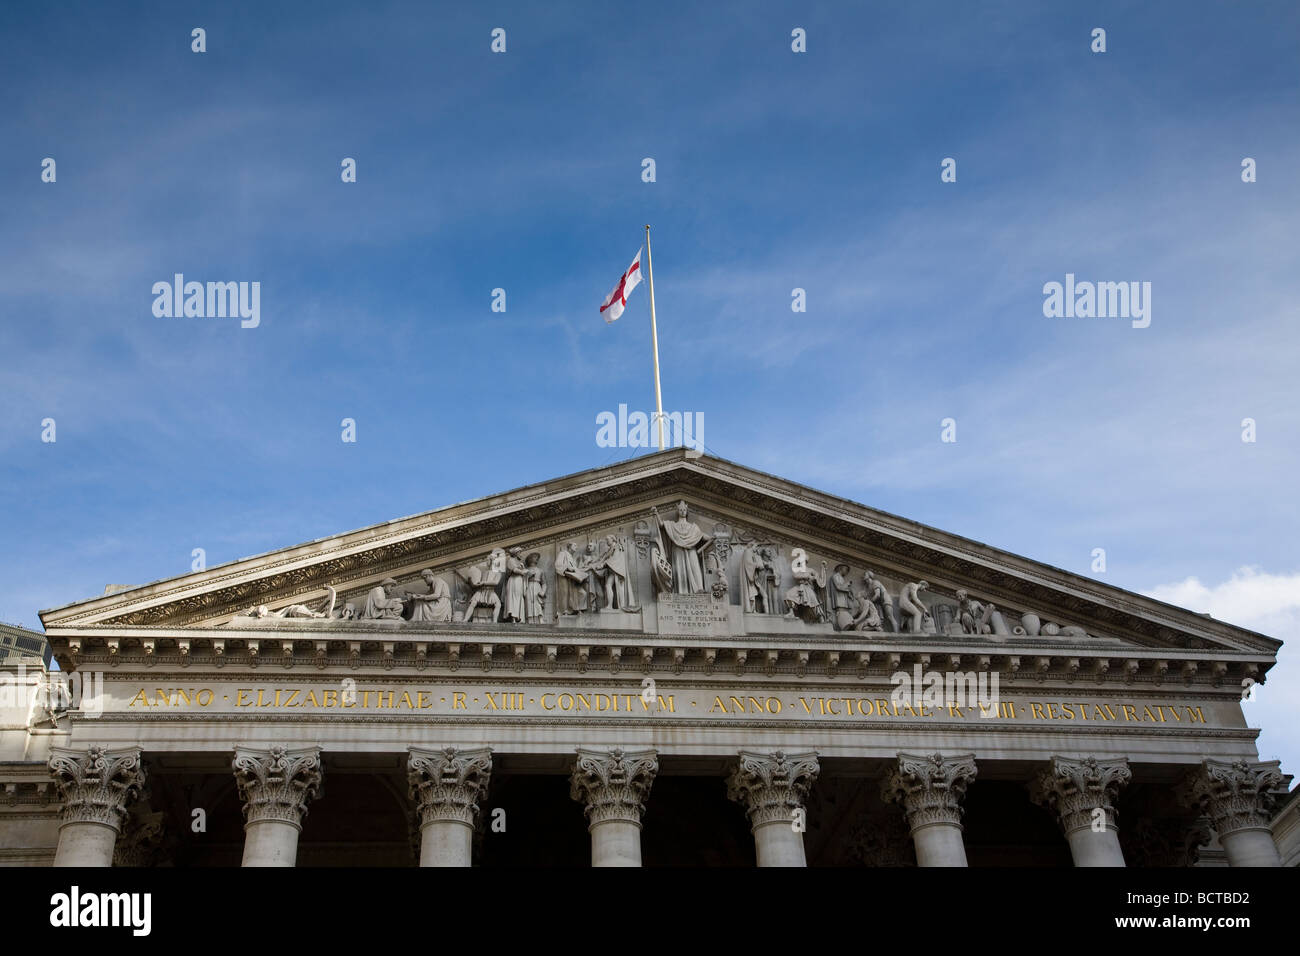 The upper front facade of the Royal Exchange in the City of London, England. Stock Photo